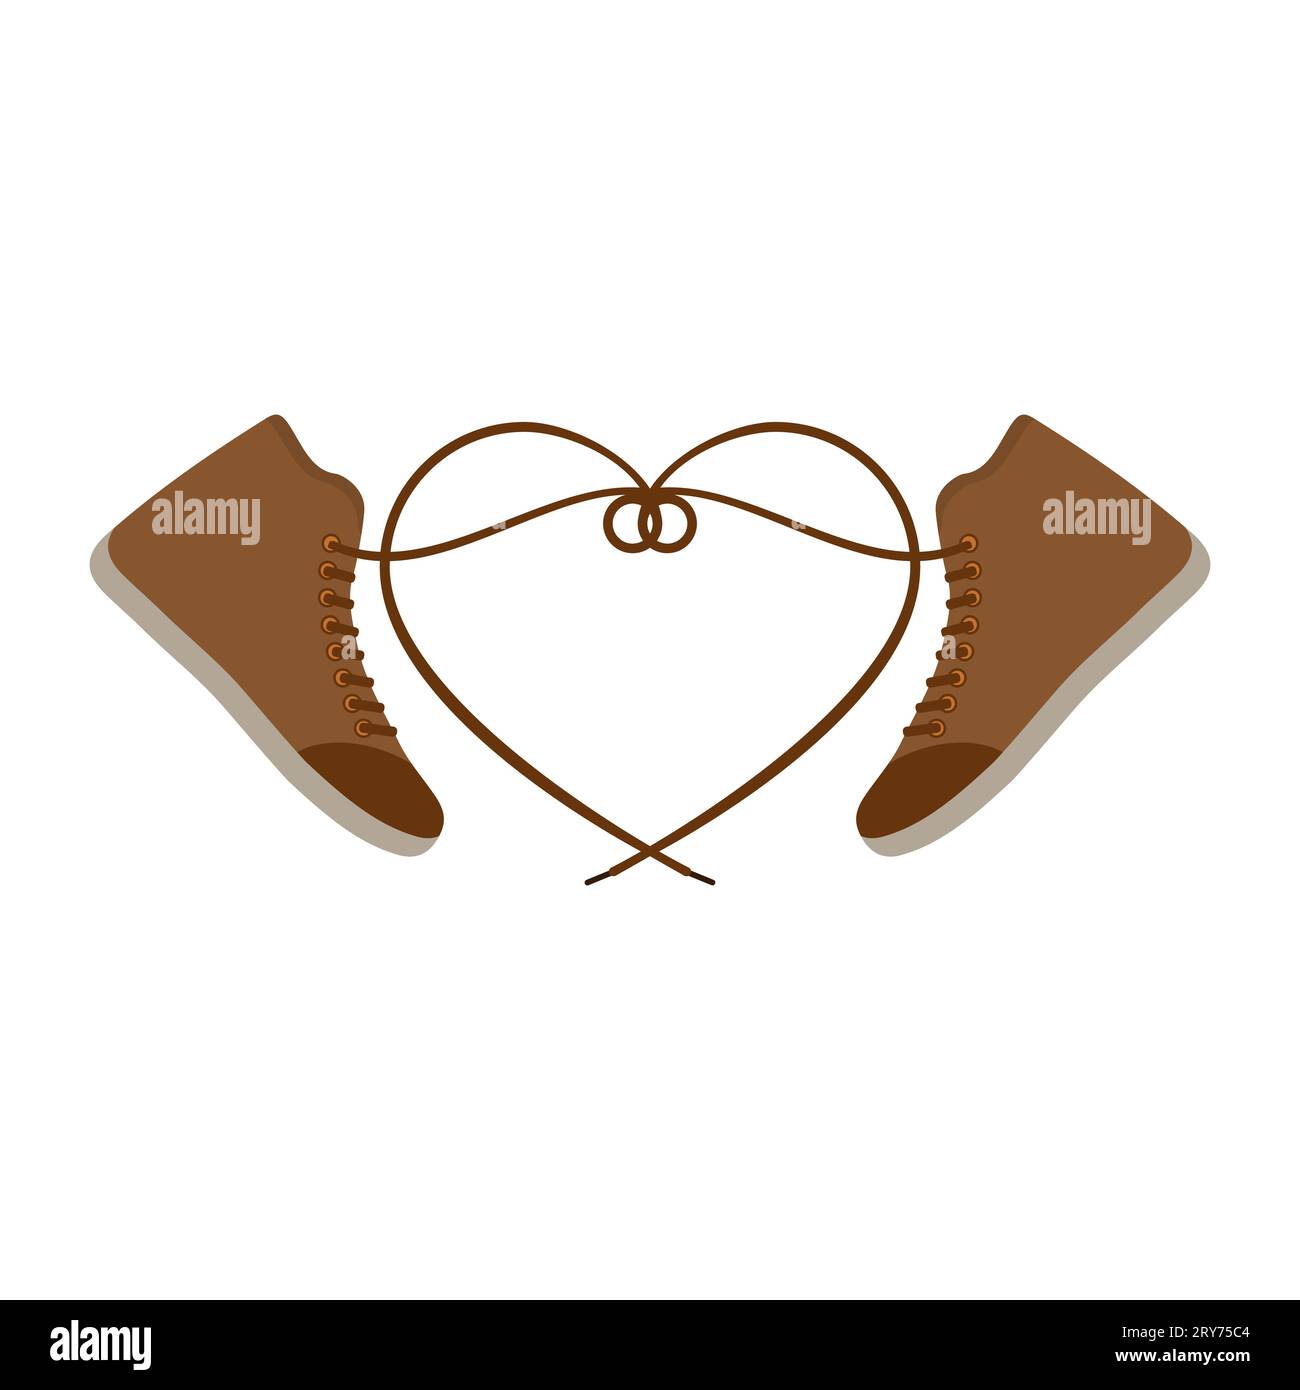 Women's sneakers and heart-shaped laces. Stock Vector